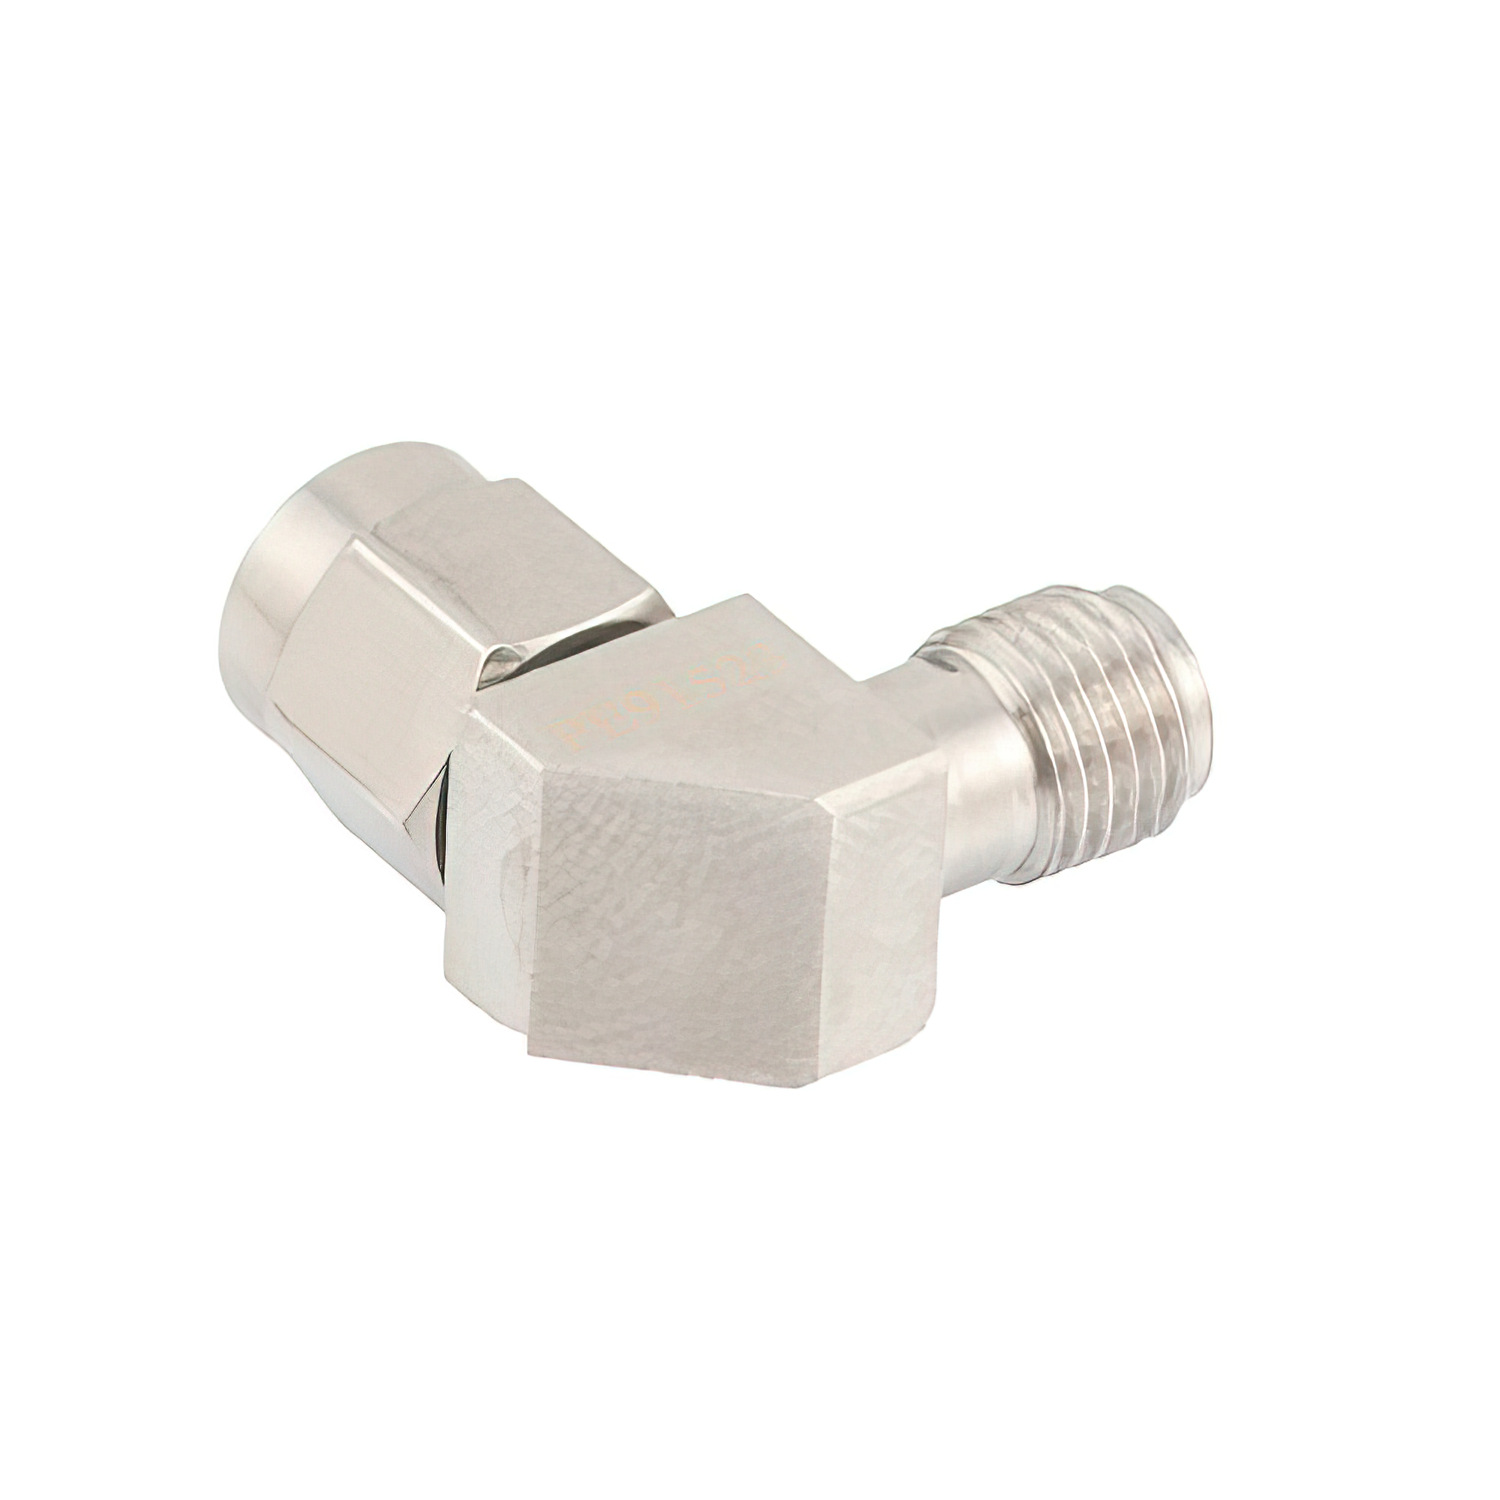 3.5mm Male to 3.5mm Female Miter Right Angle Adapter2